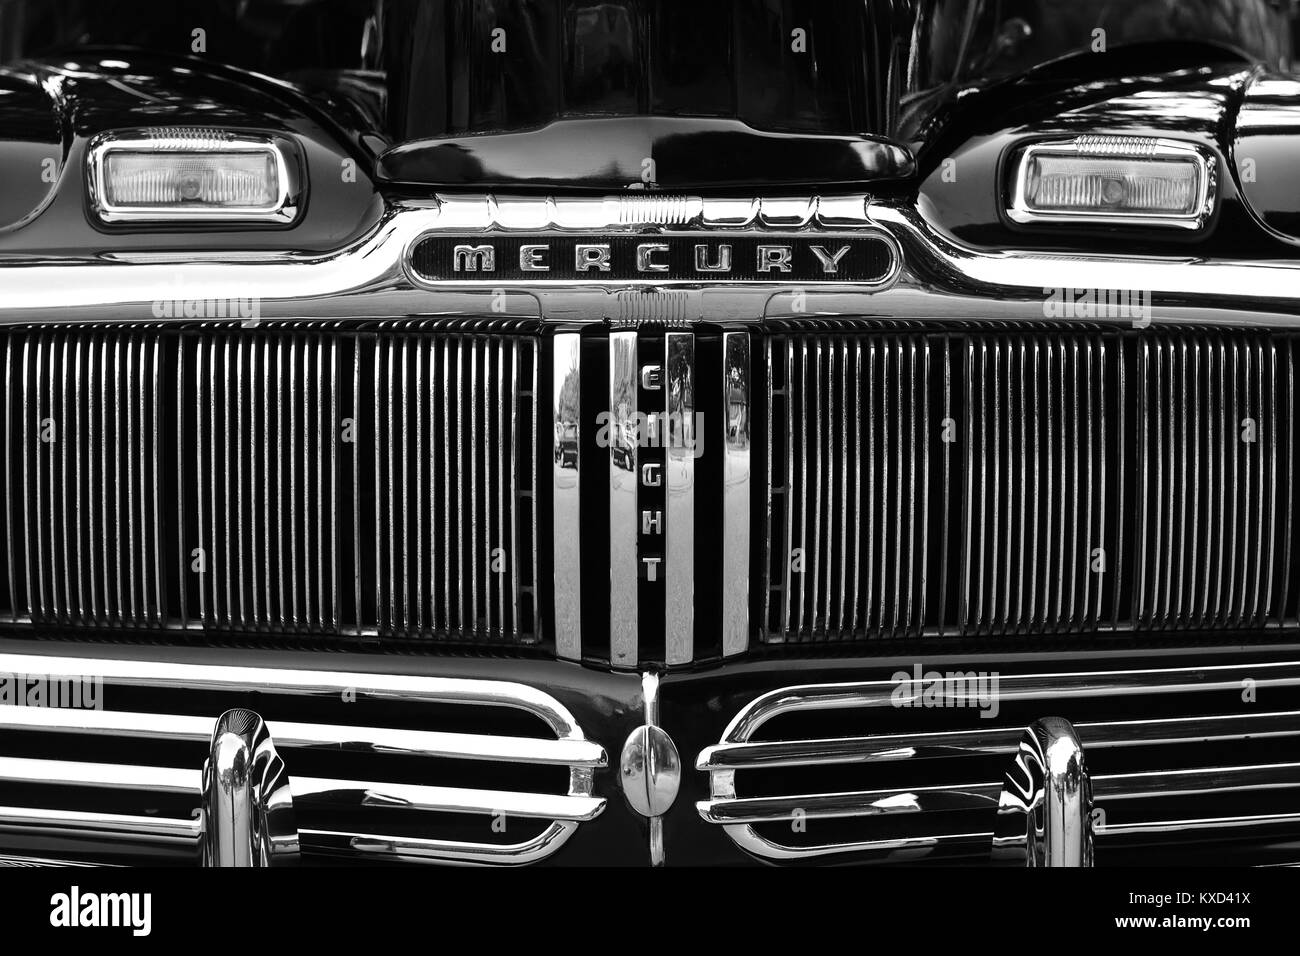 Black & chrome front end of an old classic American automobile Stock Photo